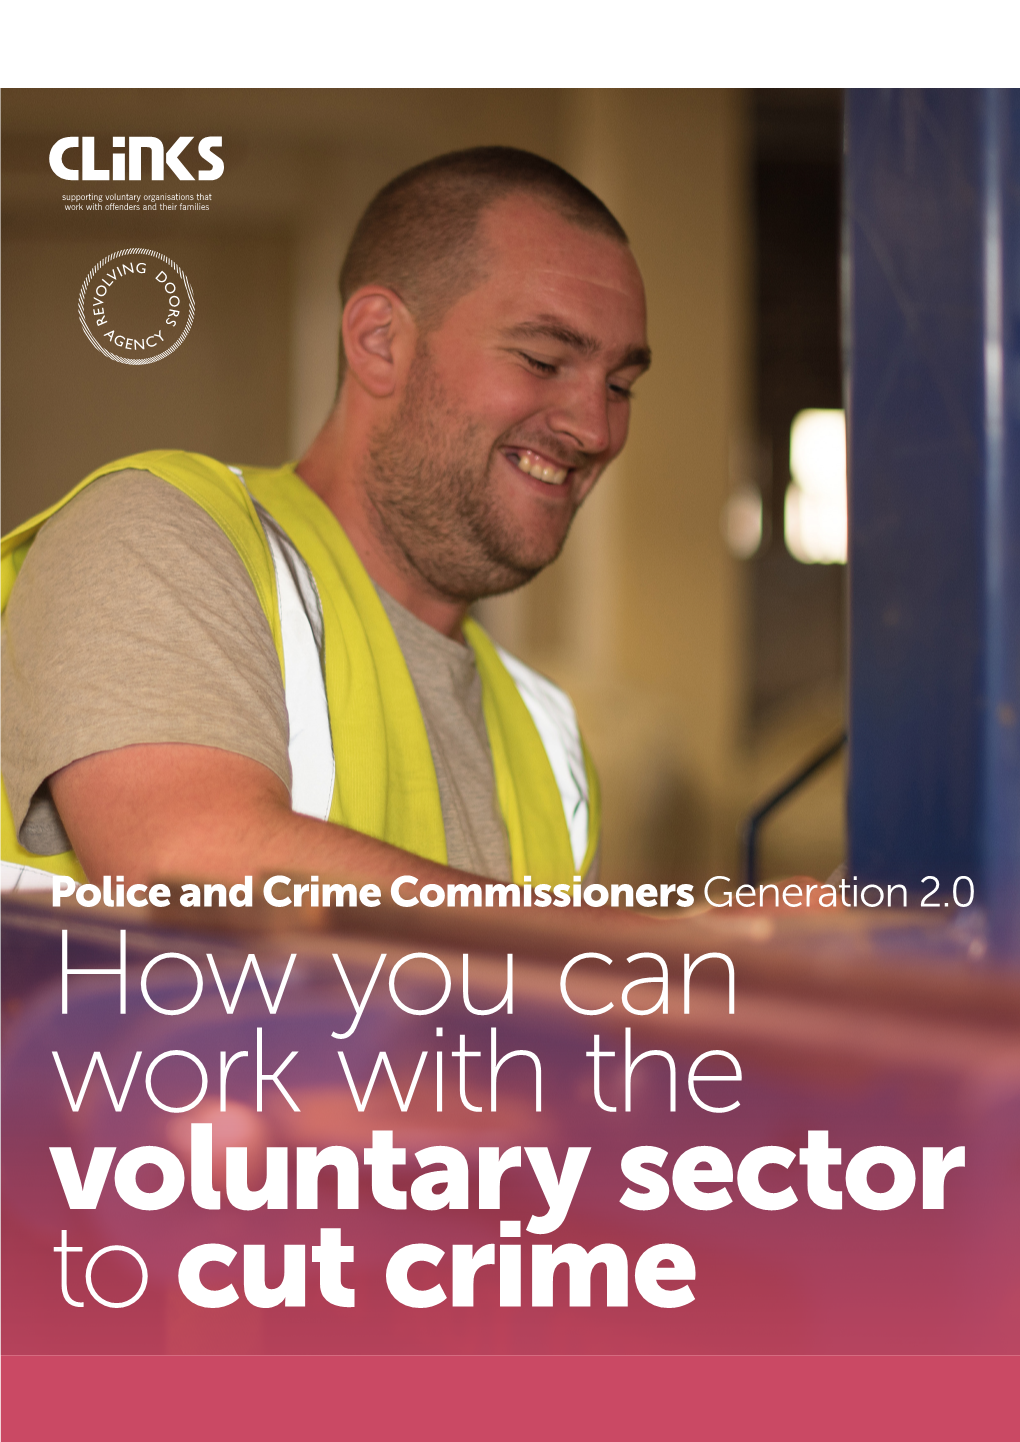 Police and Crime Commissioners Generation 2.0 How You Can Work with the Voluntary Sector to Cut Crime How You Can Work with the Voluntary Sector to Cut Crime